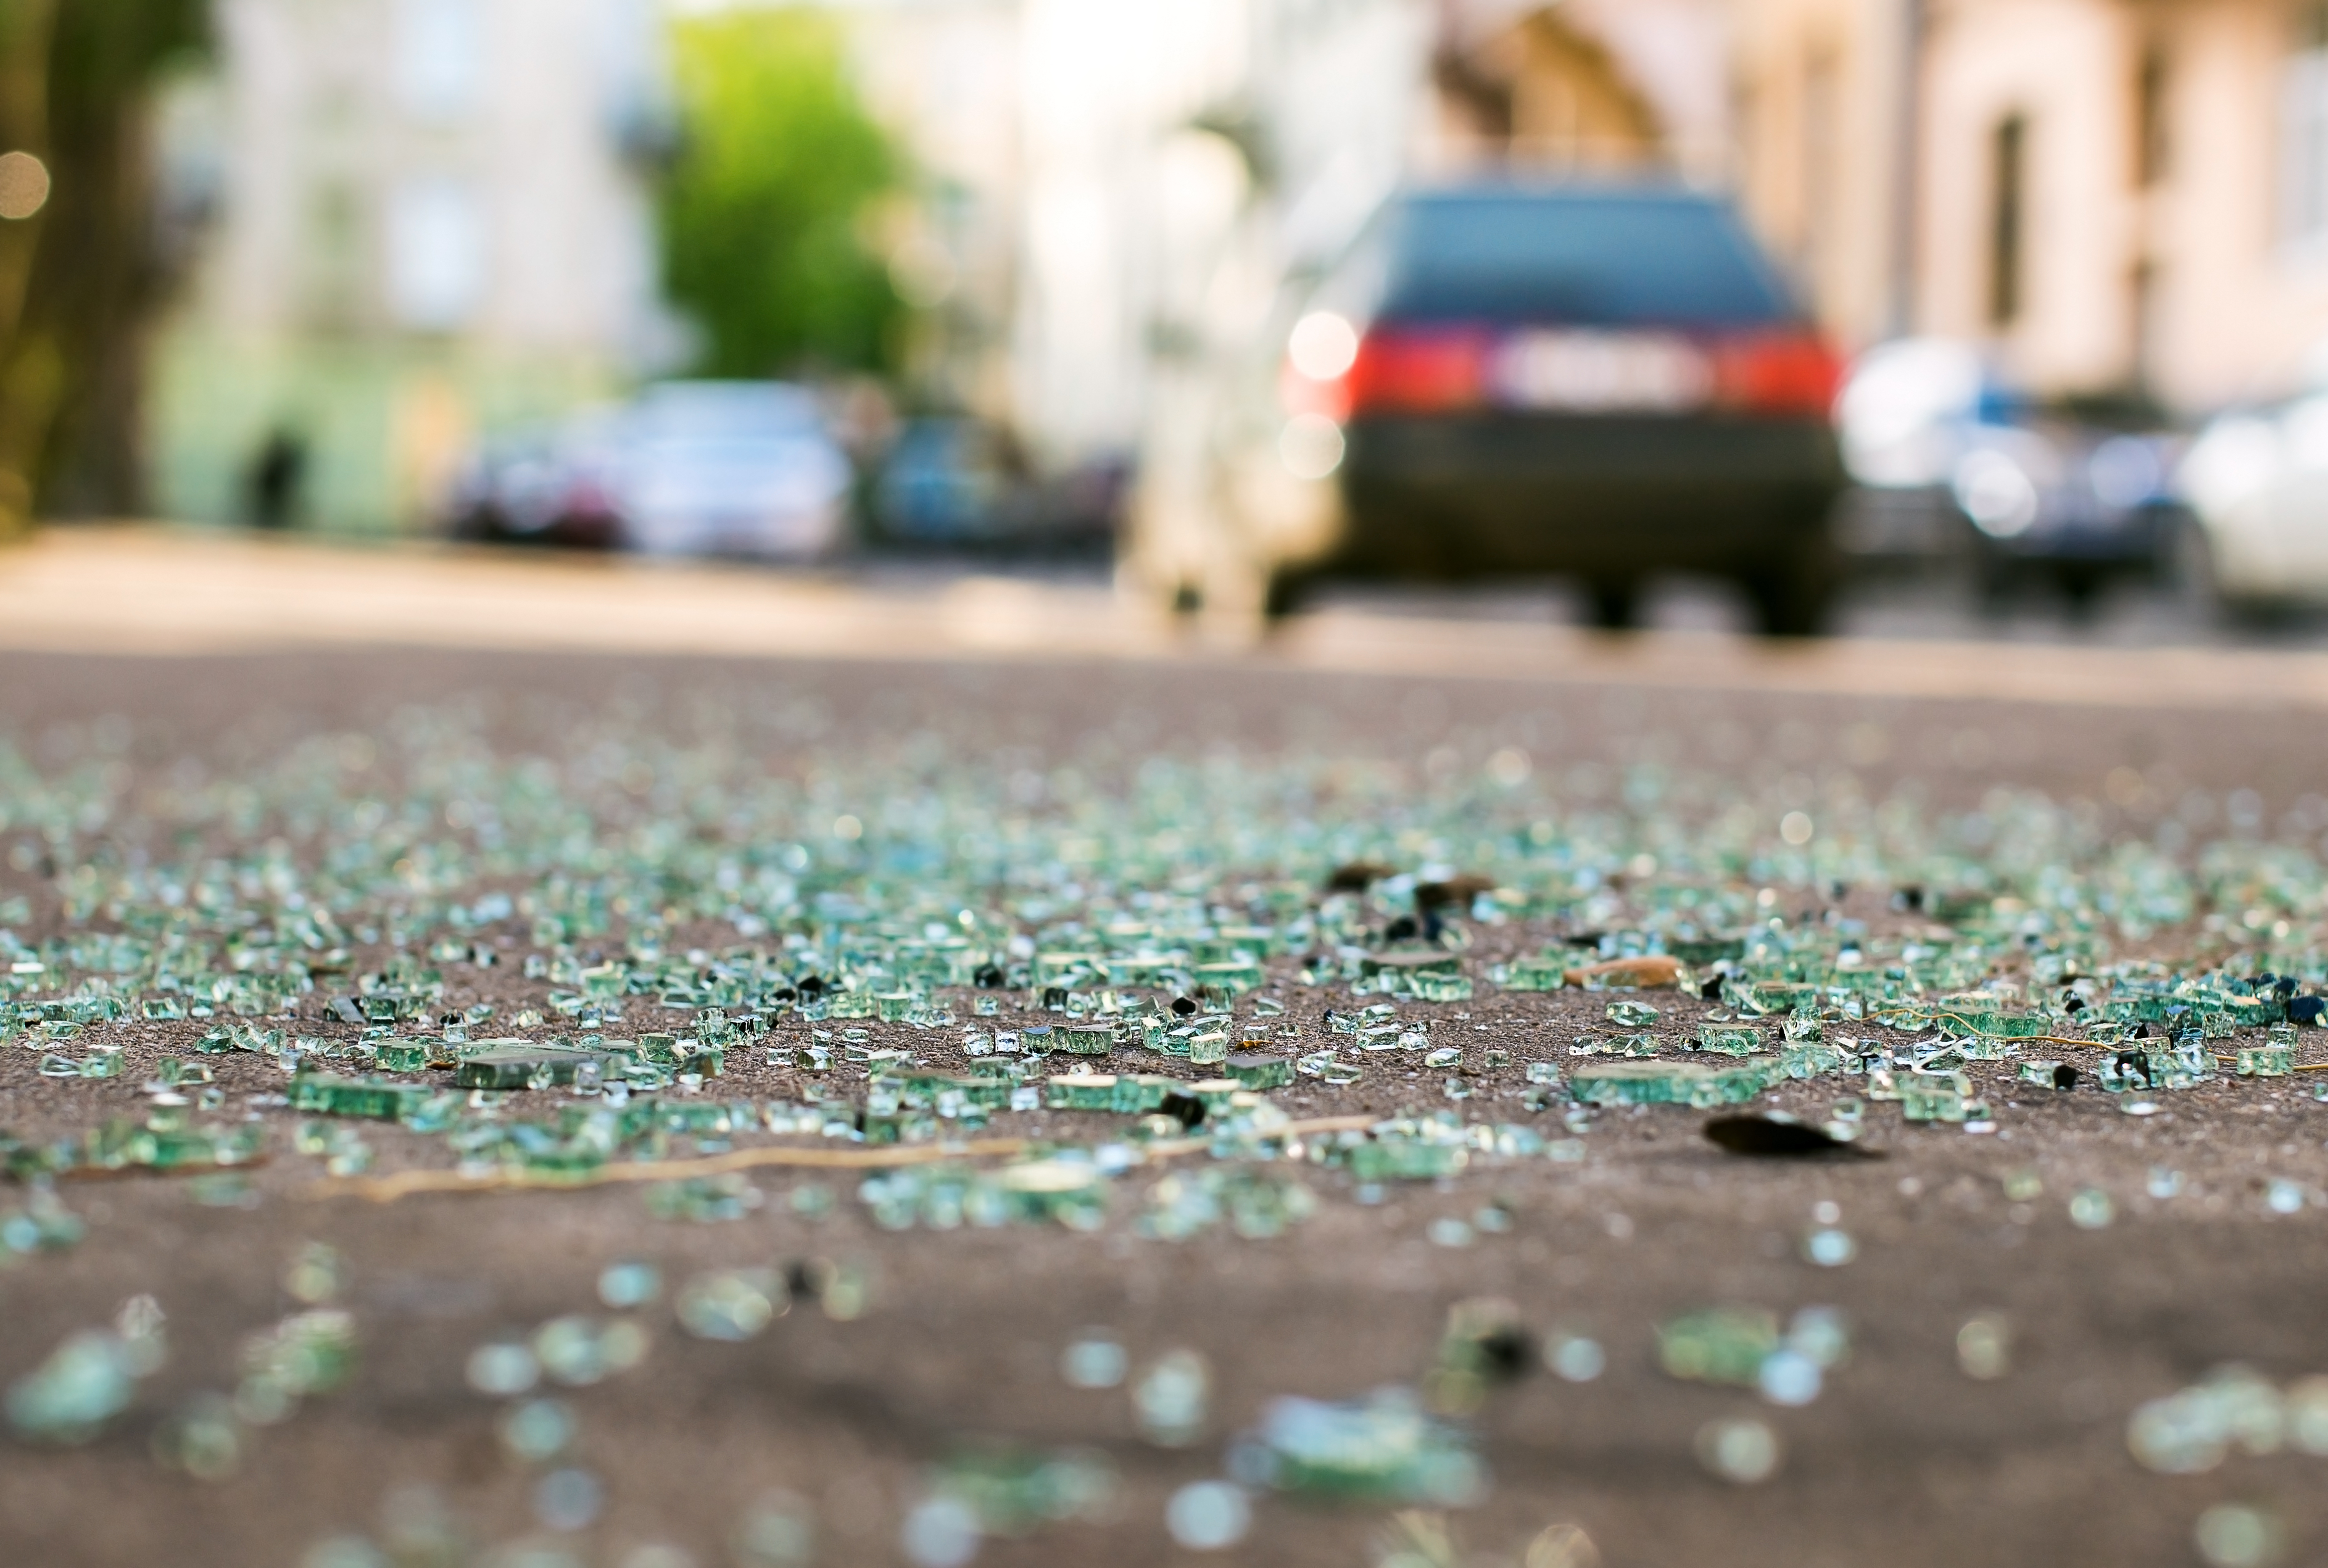 Smashed glass lies on the road after a car accident